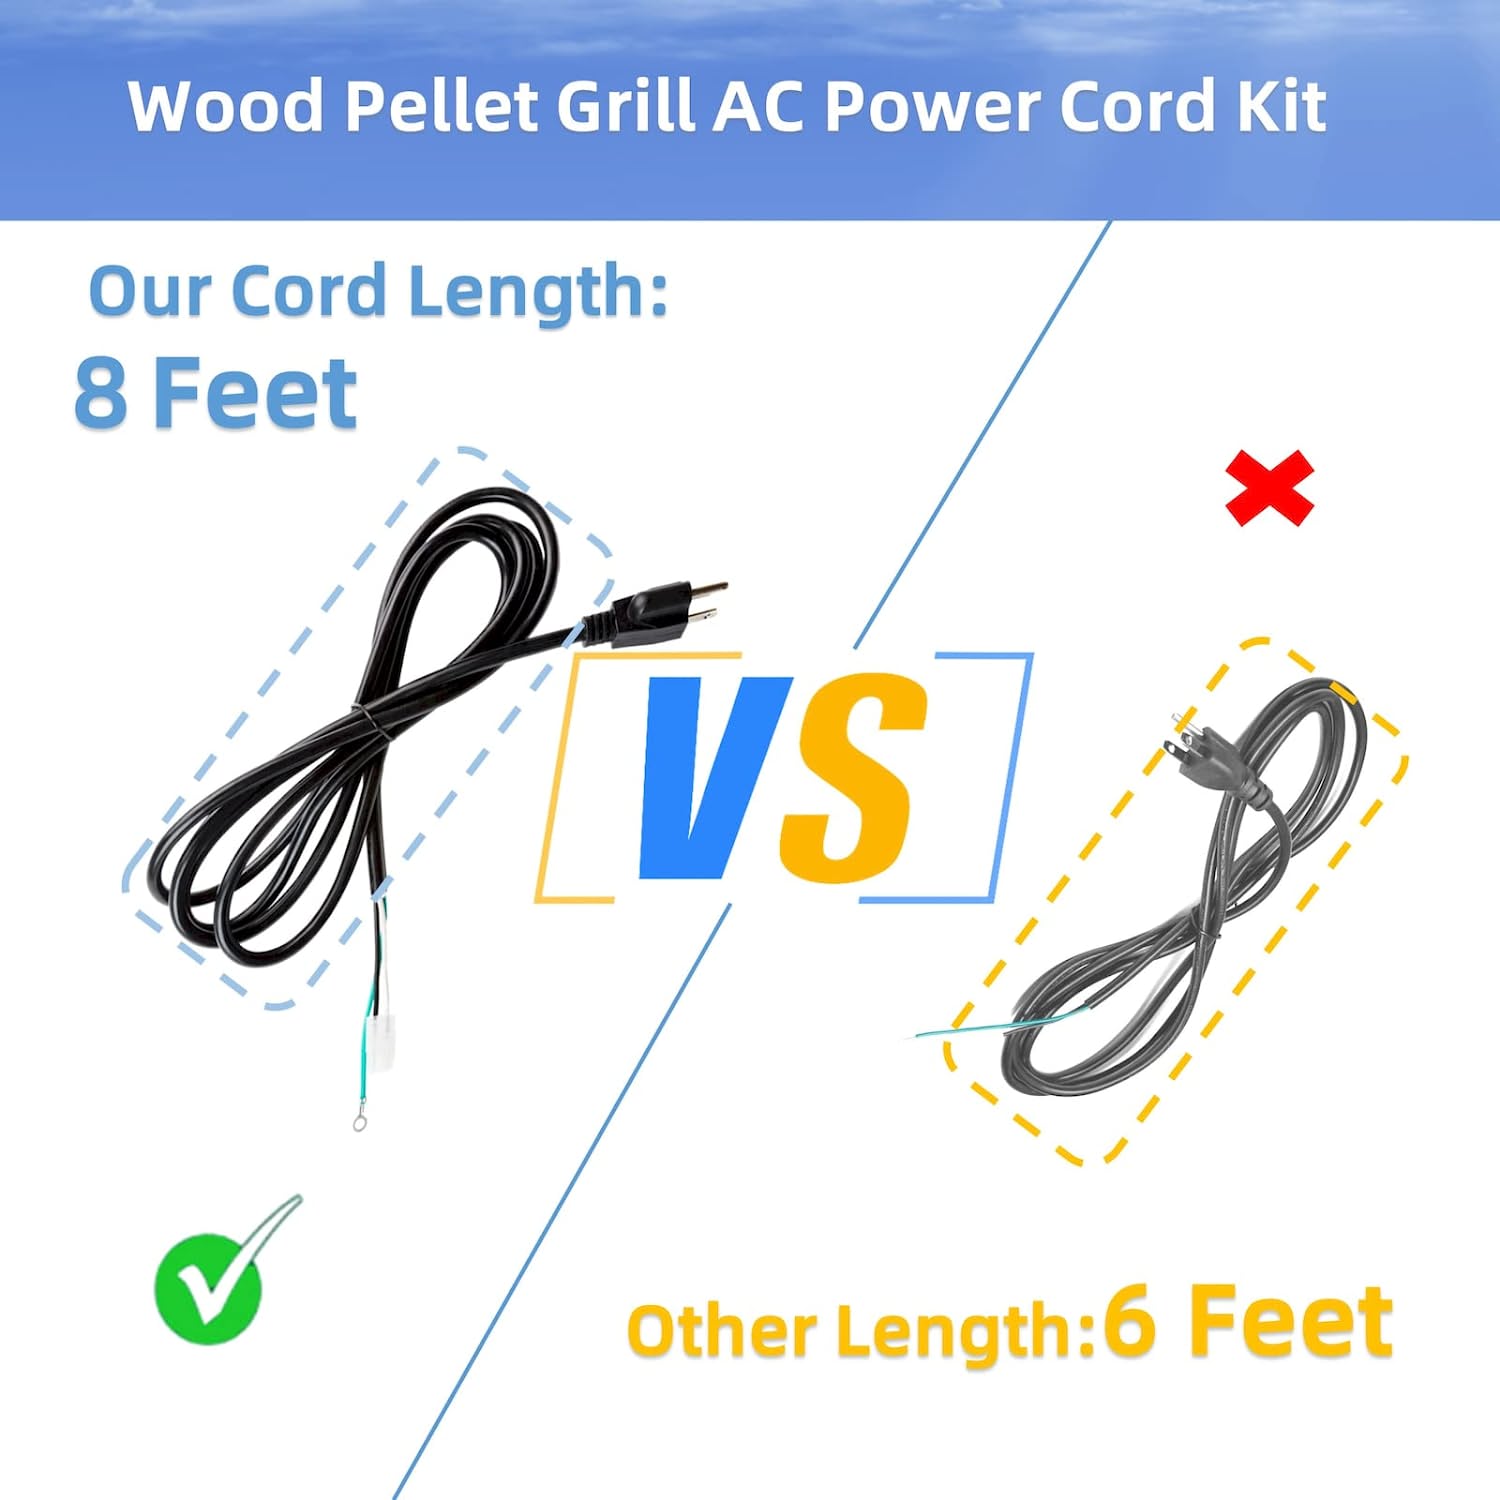 Pellet Smoker Grill Power Cord Replacement Parts KIT0089 for Traeger and Pit Boss Wood Pellet Grills,8 Feet,Black